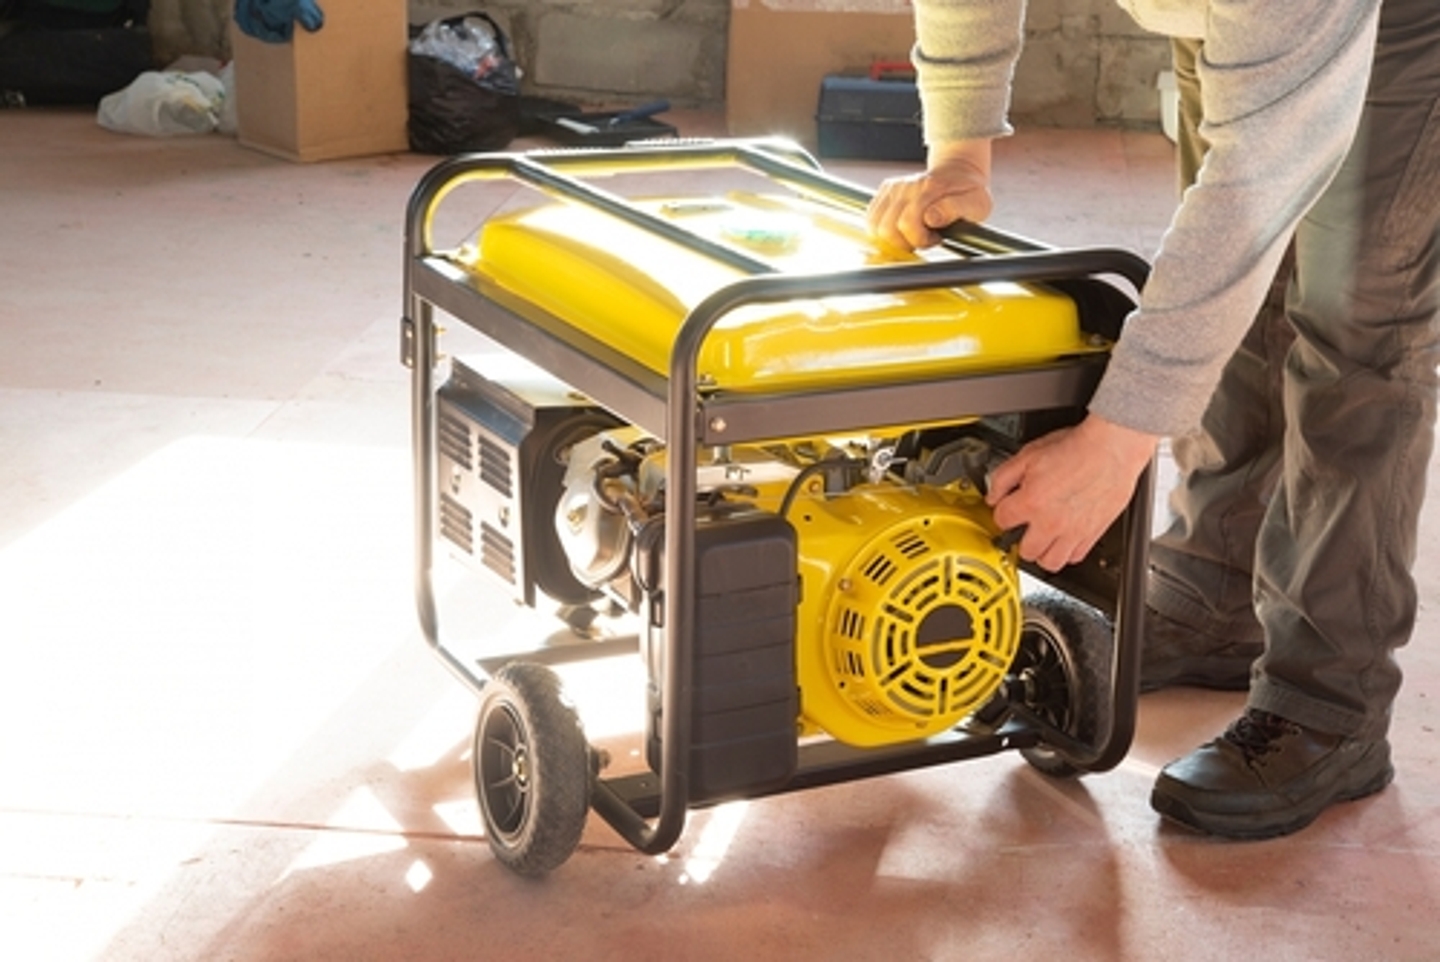 A portable generator can be a lifesaver when the power goes out but it can also be a source of carbon monoxide poisoning if it is not used properly. 